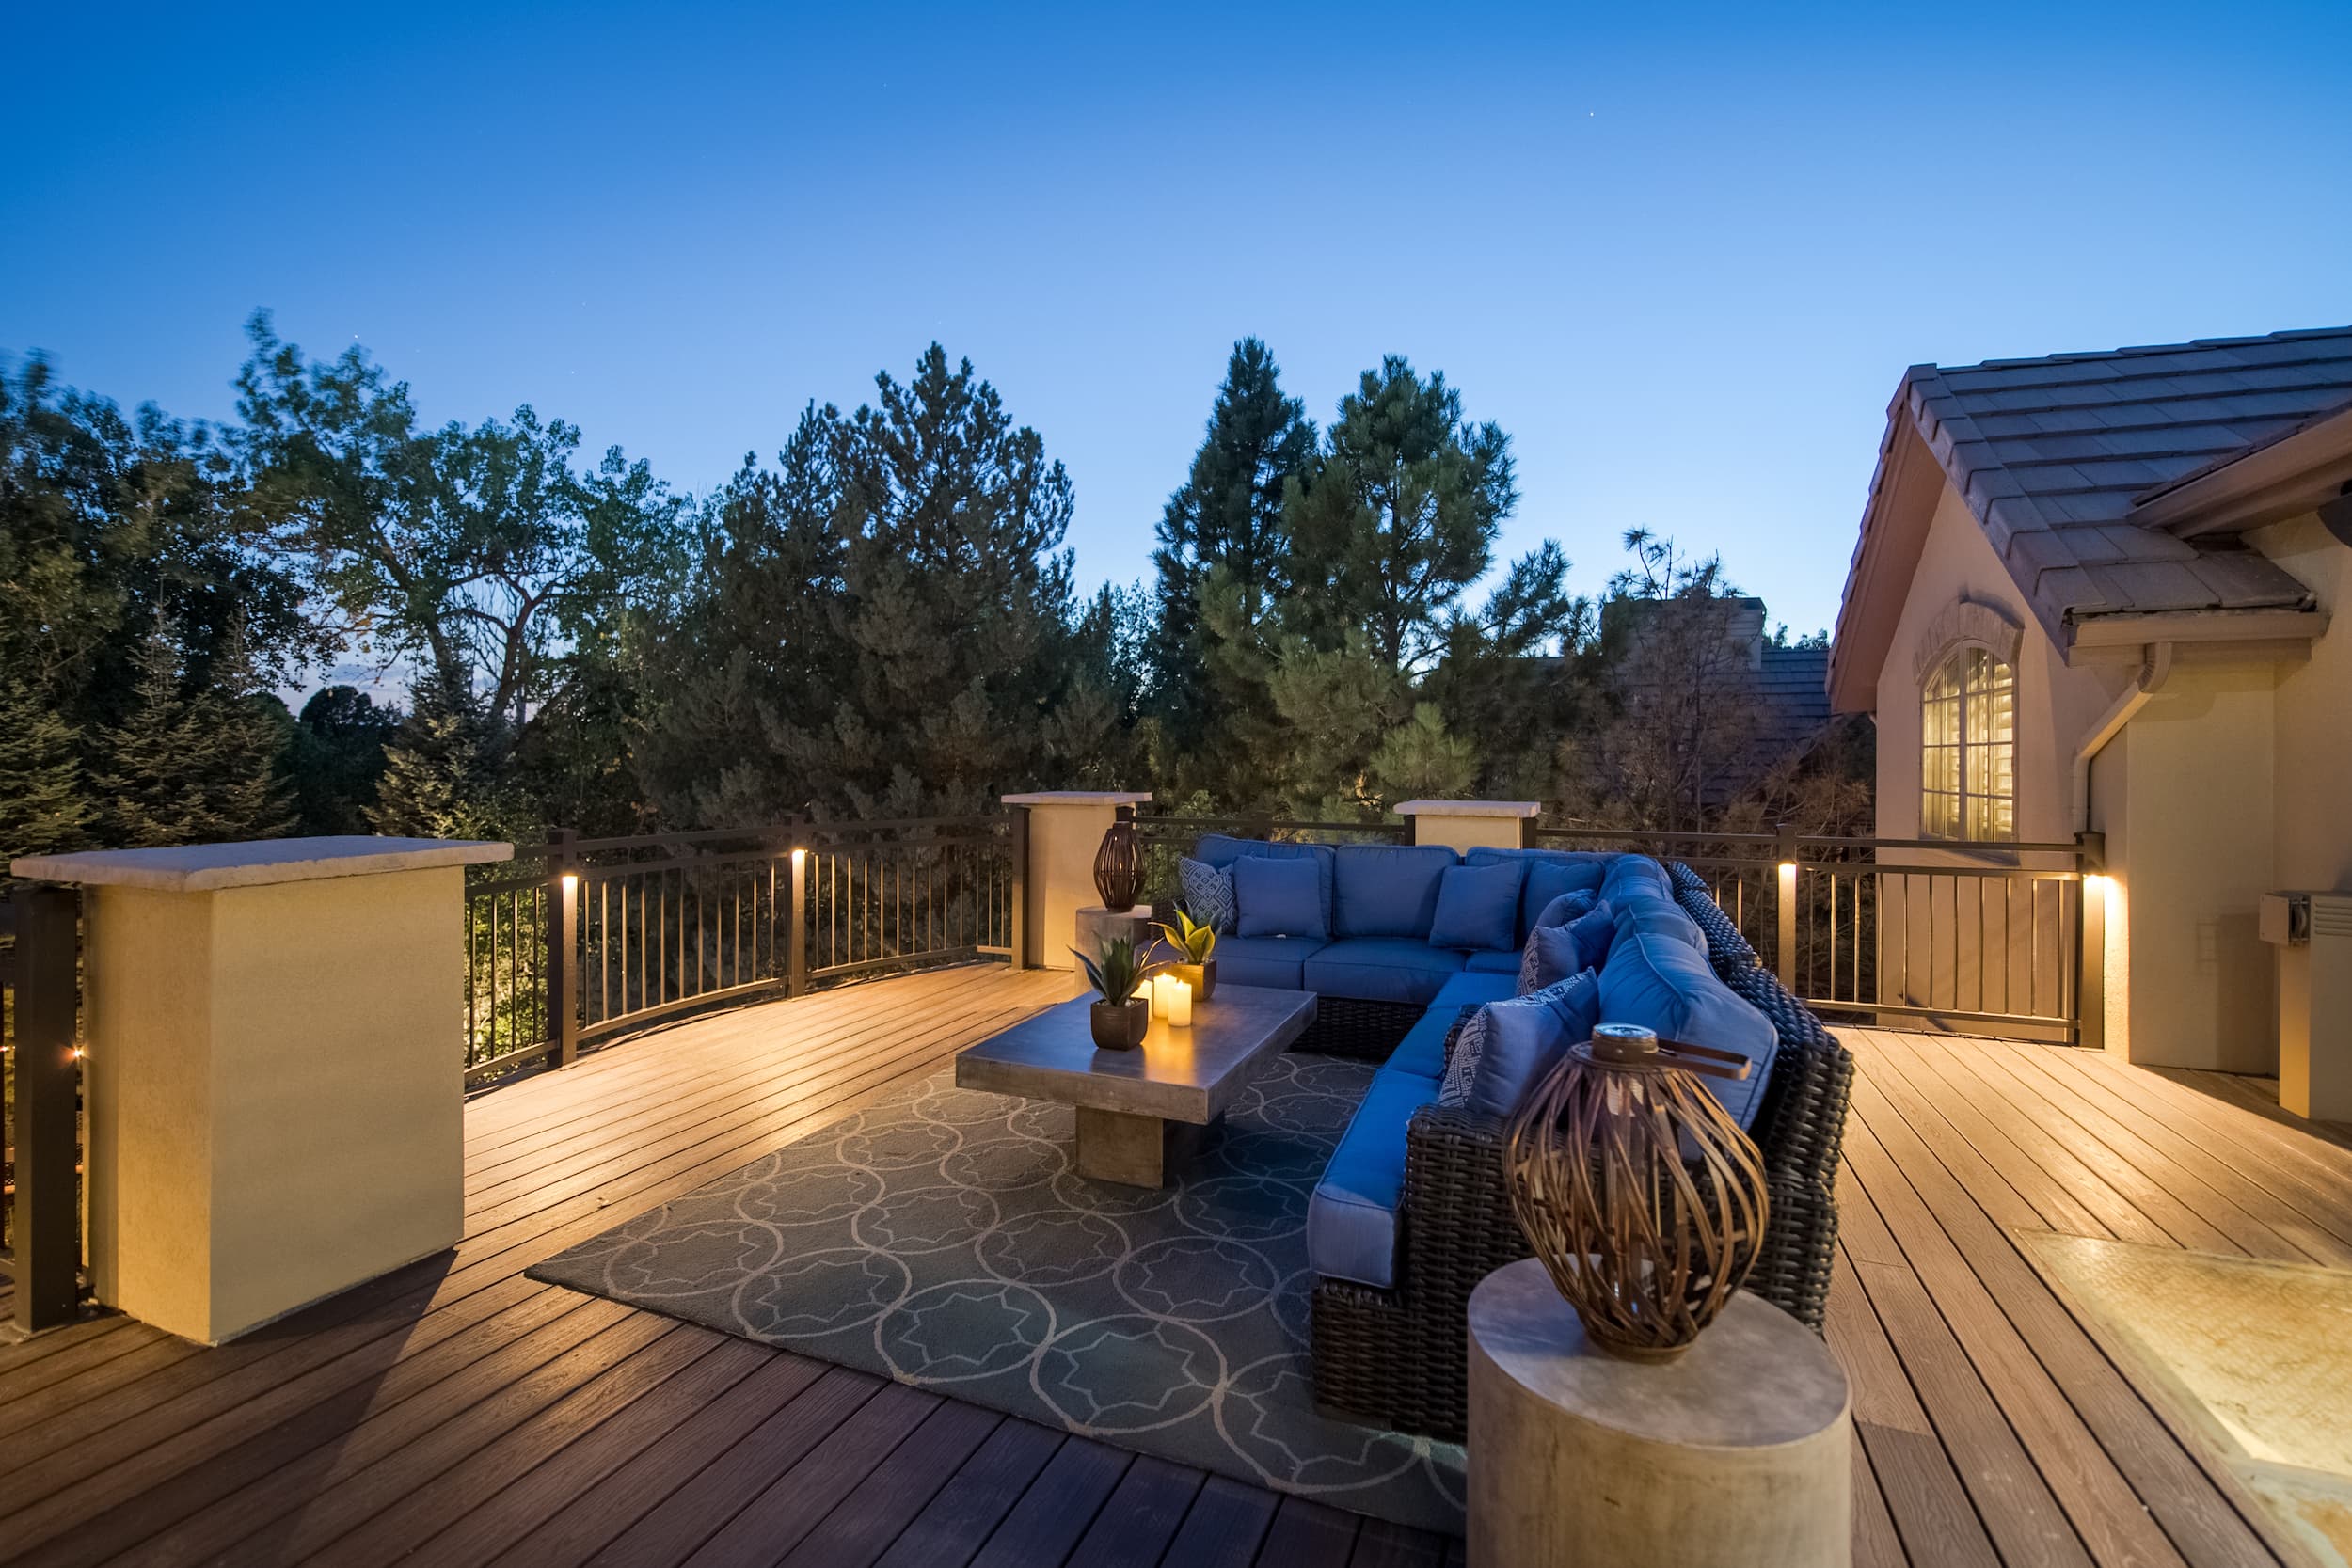 A deck with furniture and lighting at dusk.